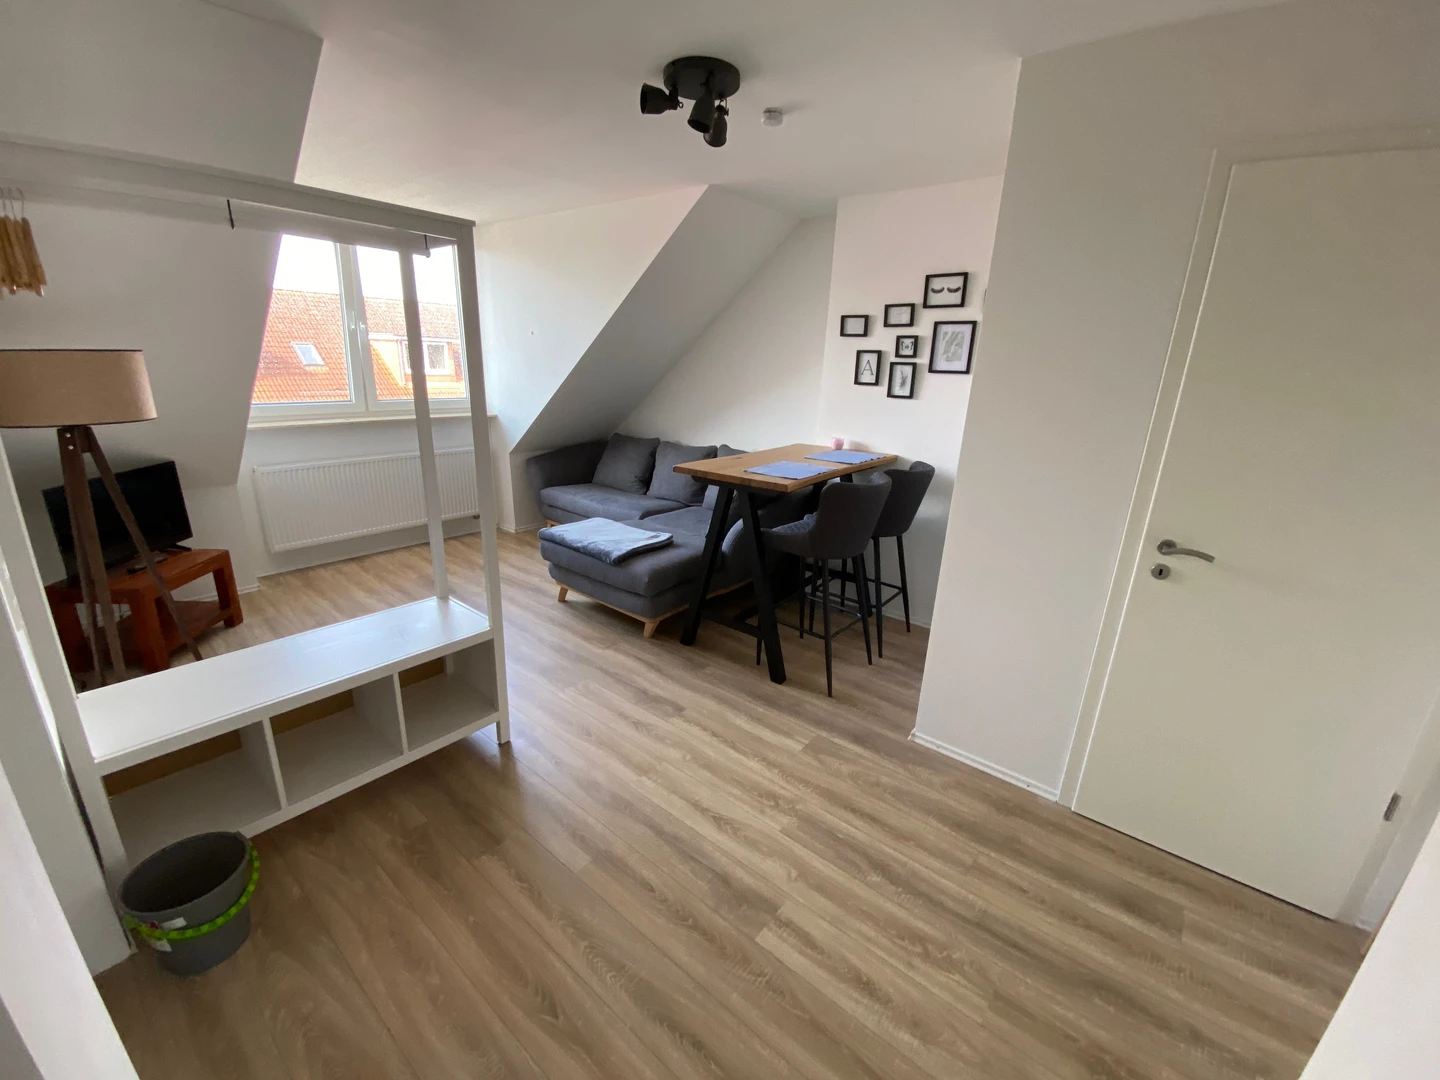 Renting rooms by the month in kiel